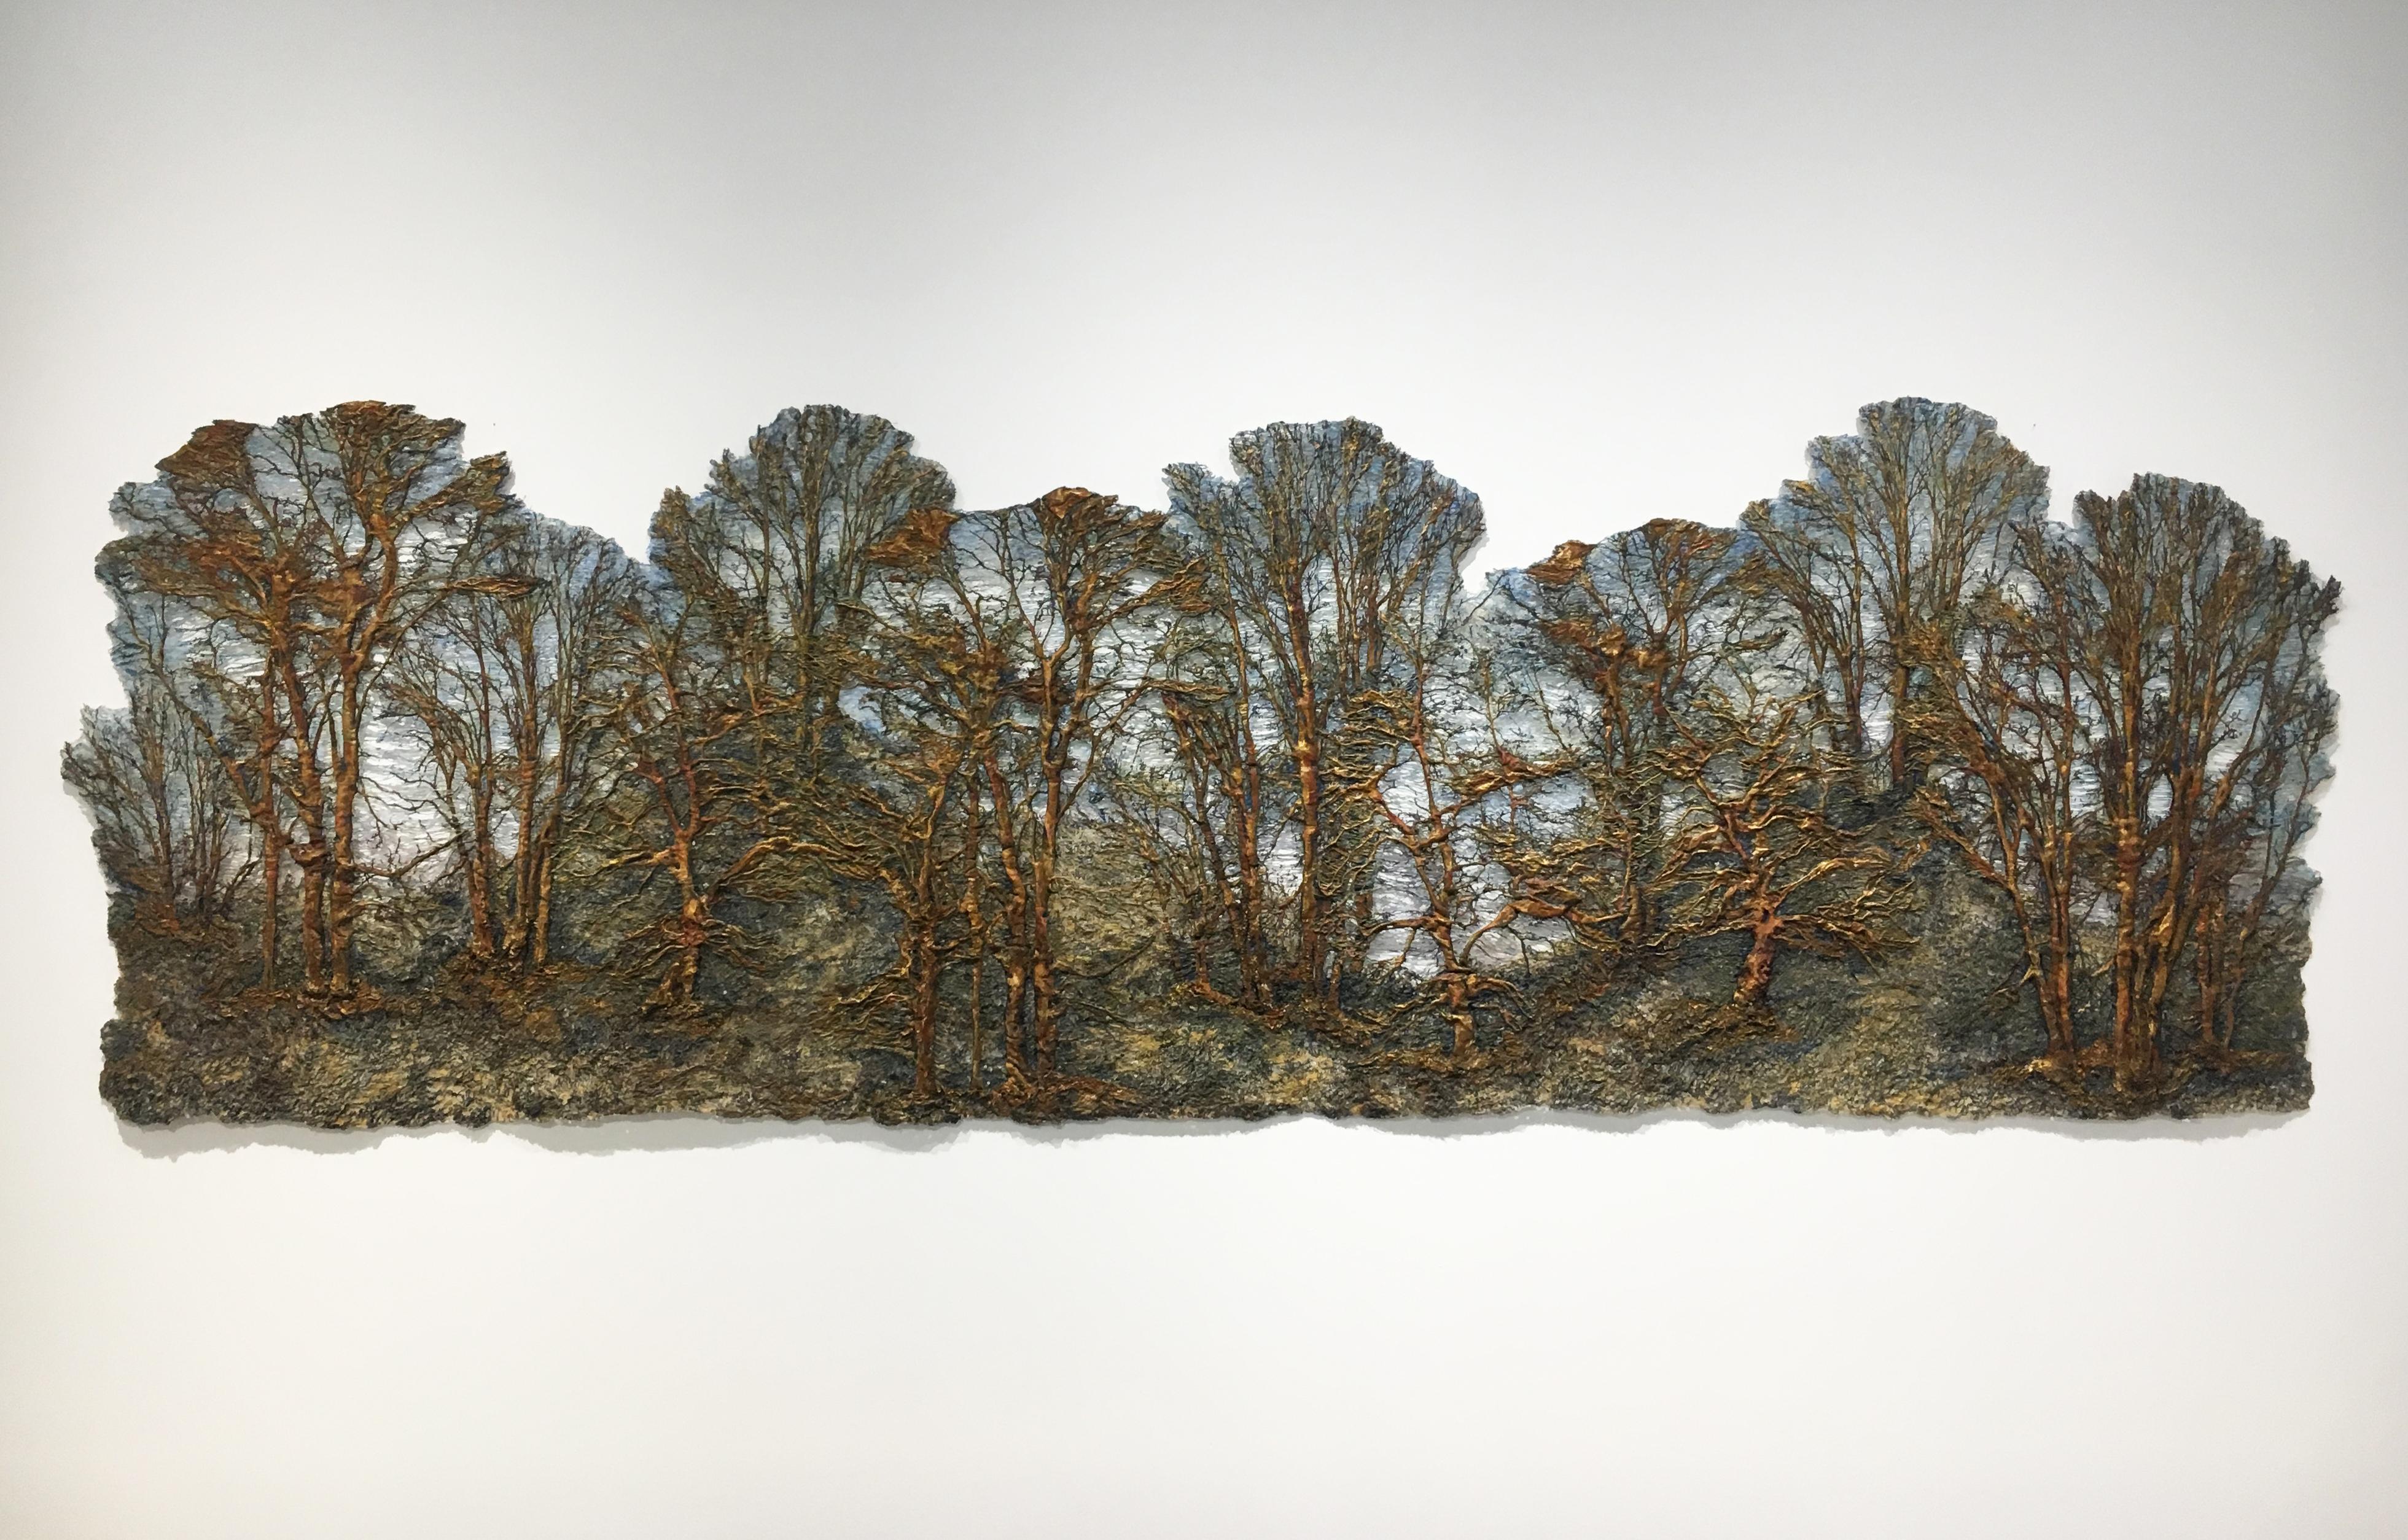 Lesley Richmond Still-Life Sculpture - "Forest", silk and cotton mixed media wall mounting sculpture, paint and patina